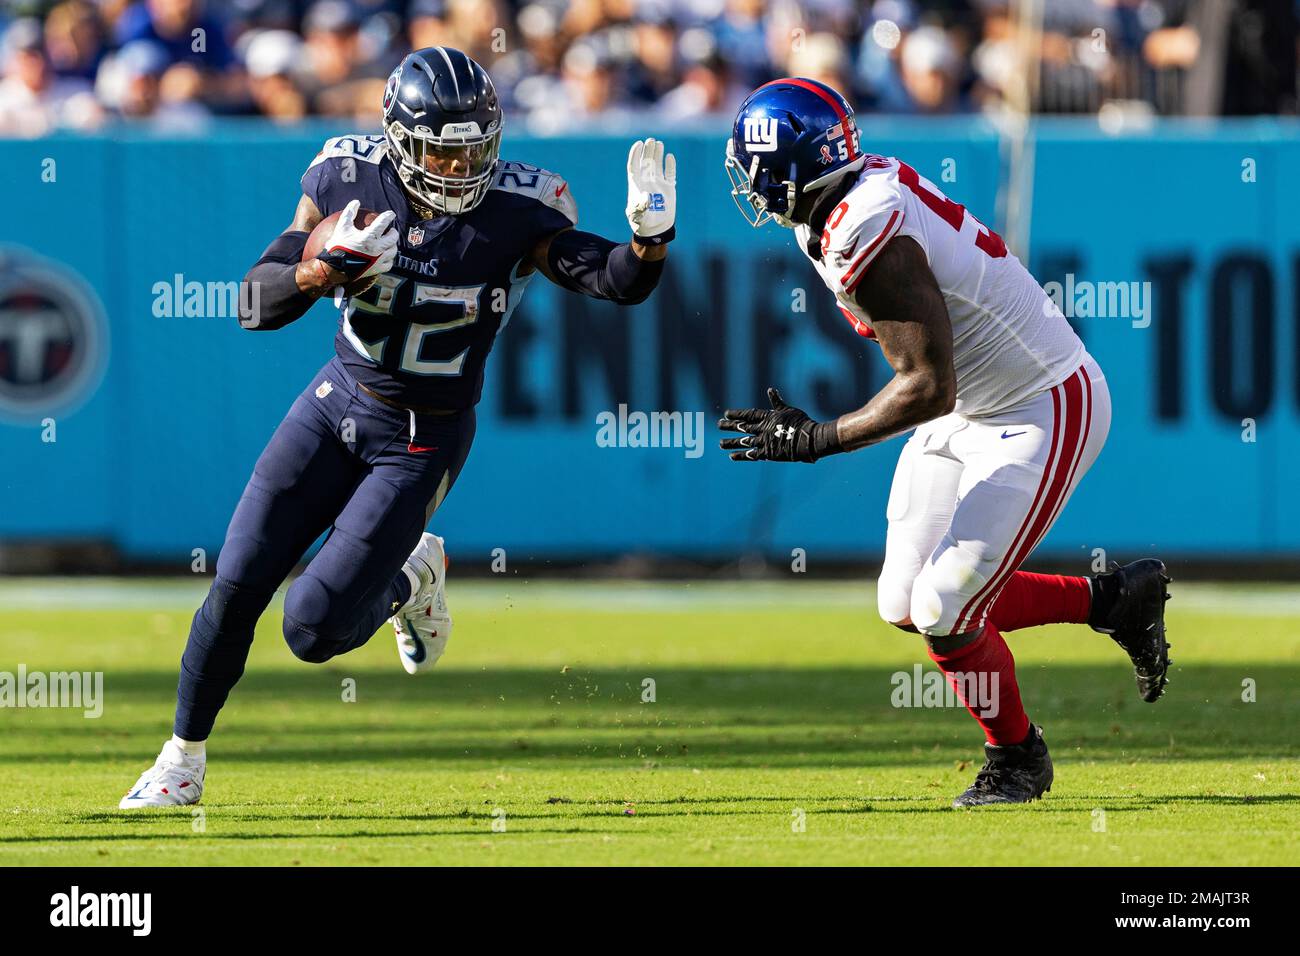 Tennessee Titans running back Derrick Henry (22) runs for yardage as hes chased by New York